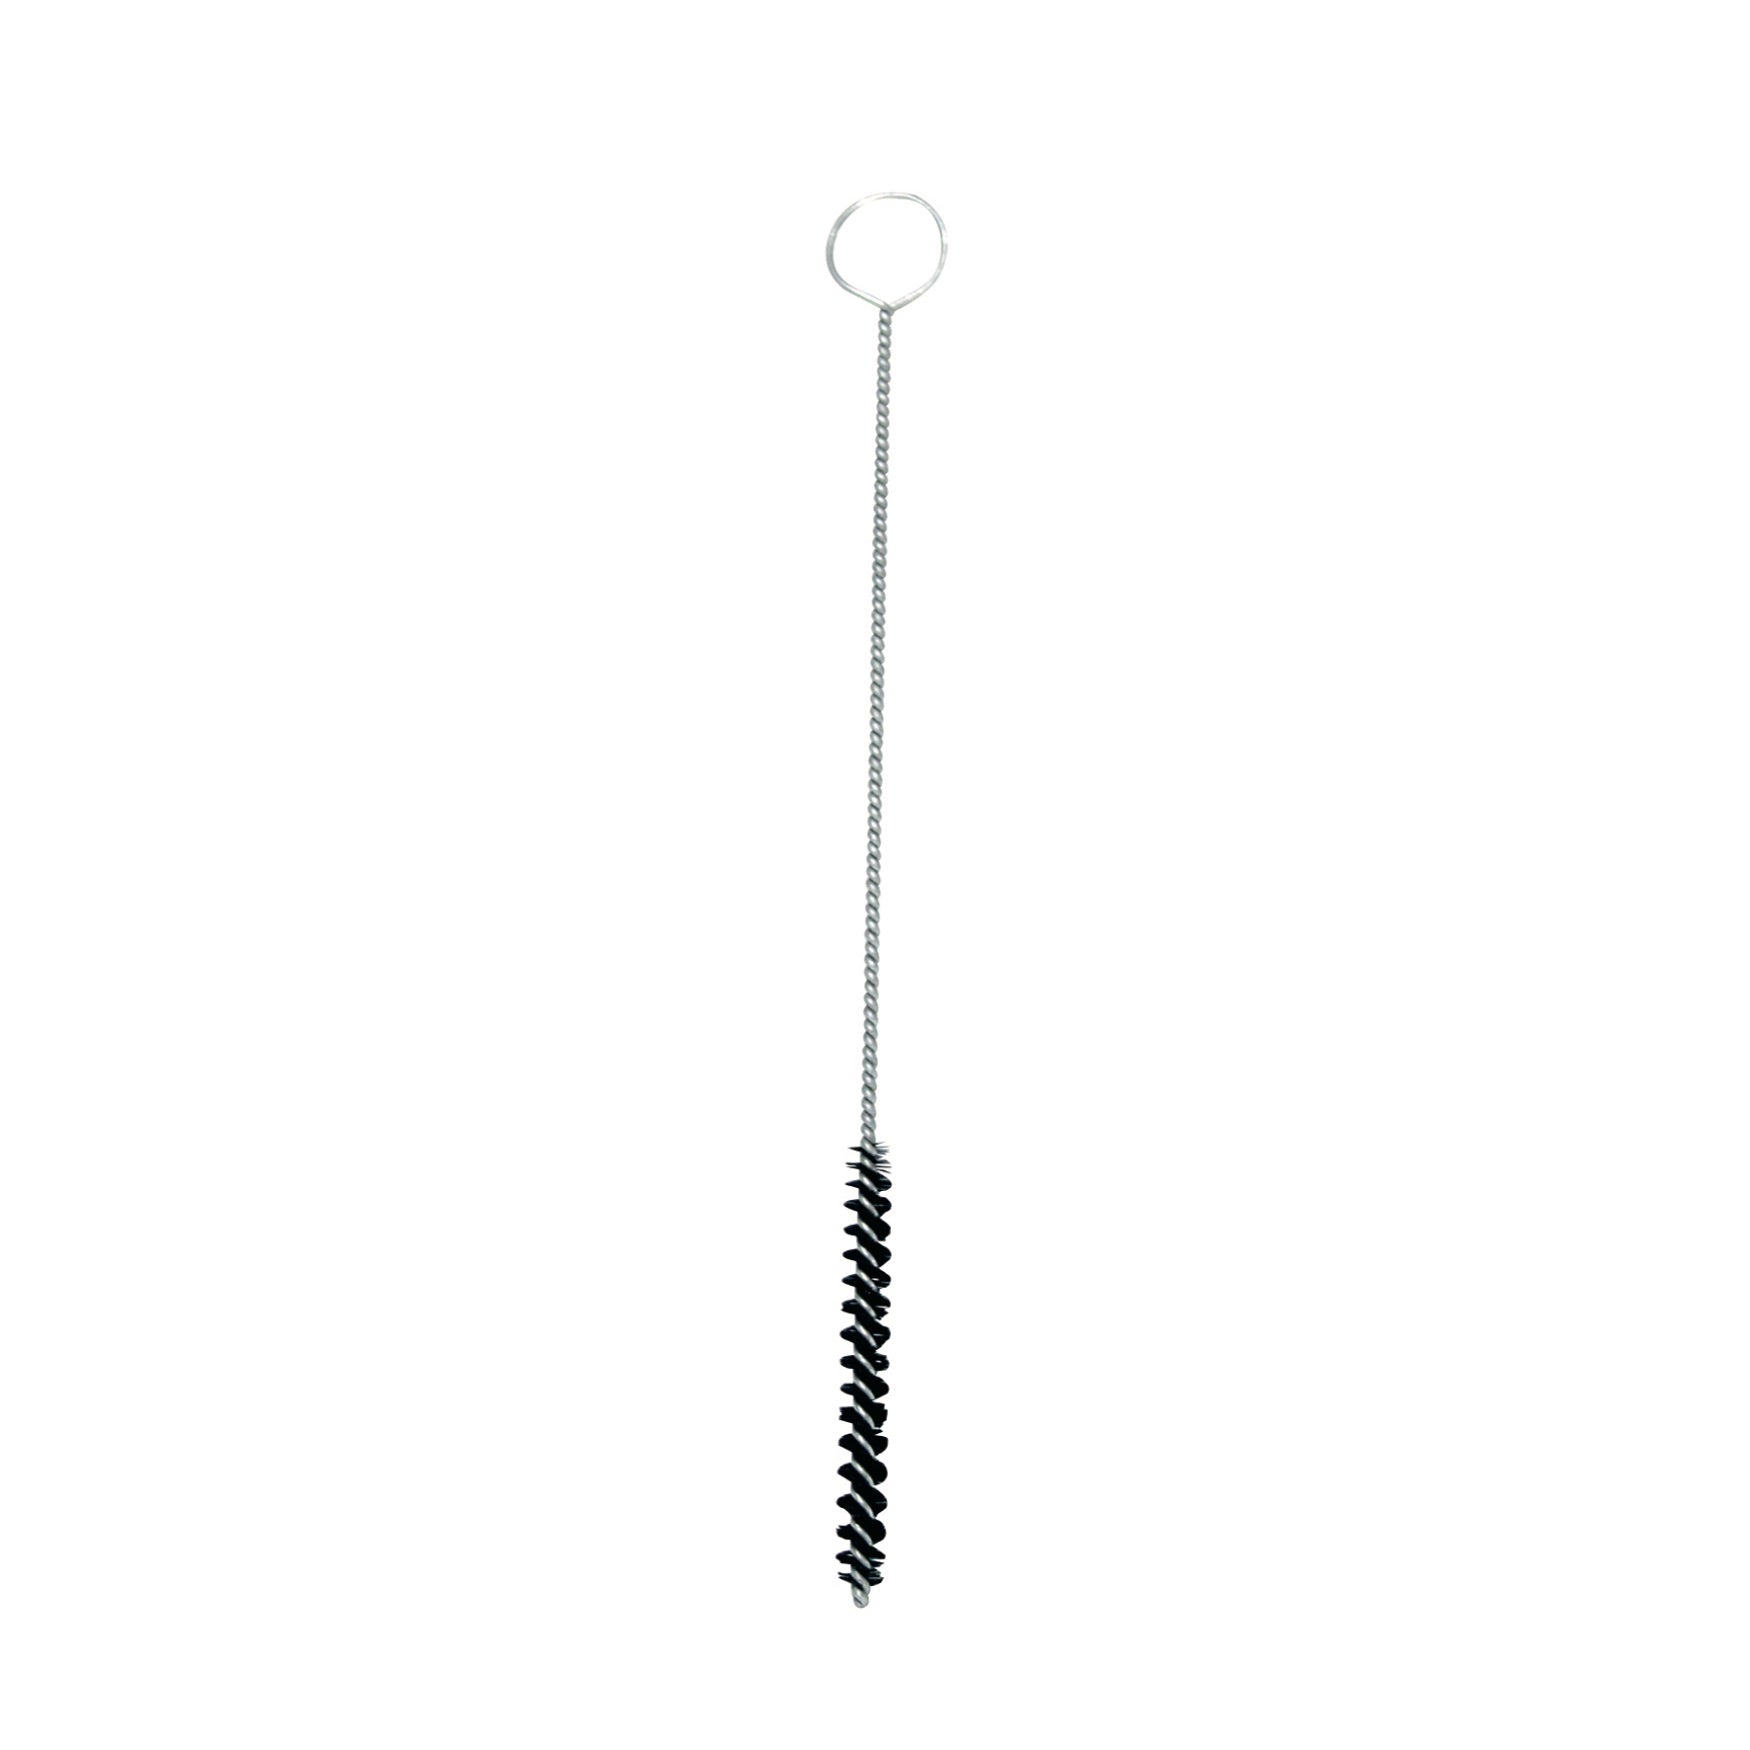 Extremely Thin Twisted Wire Brush - 0.6 cm diameter